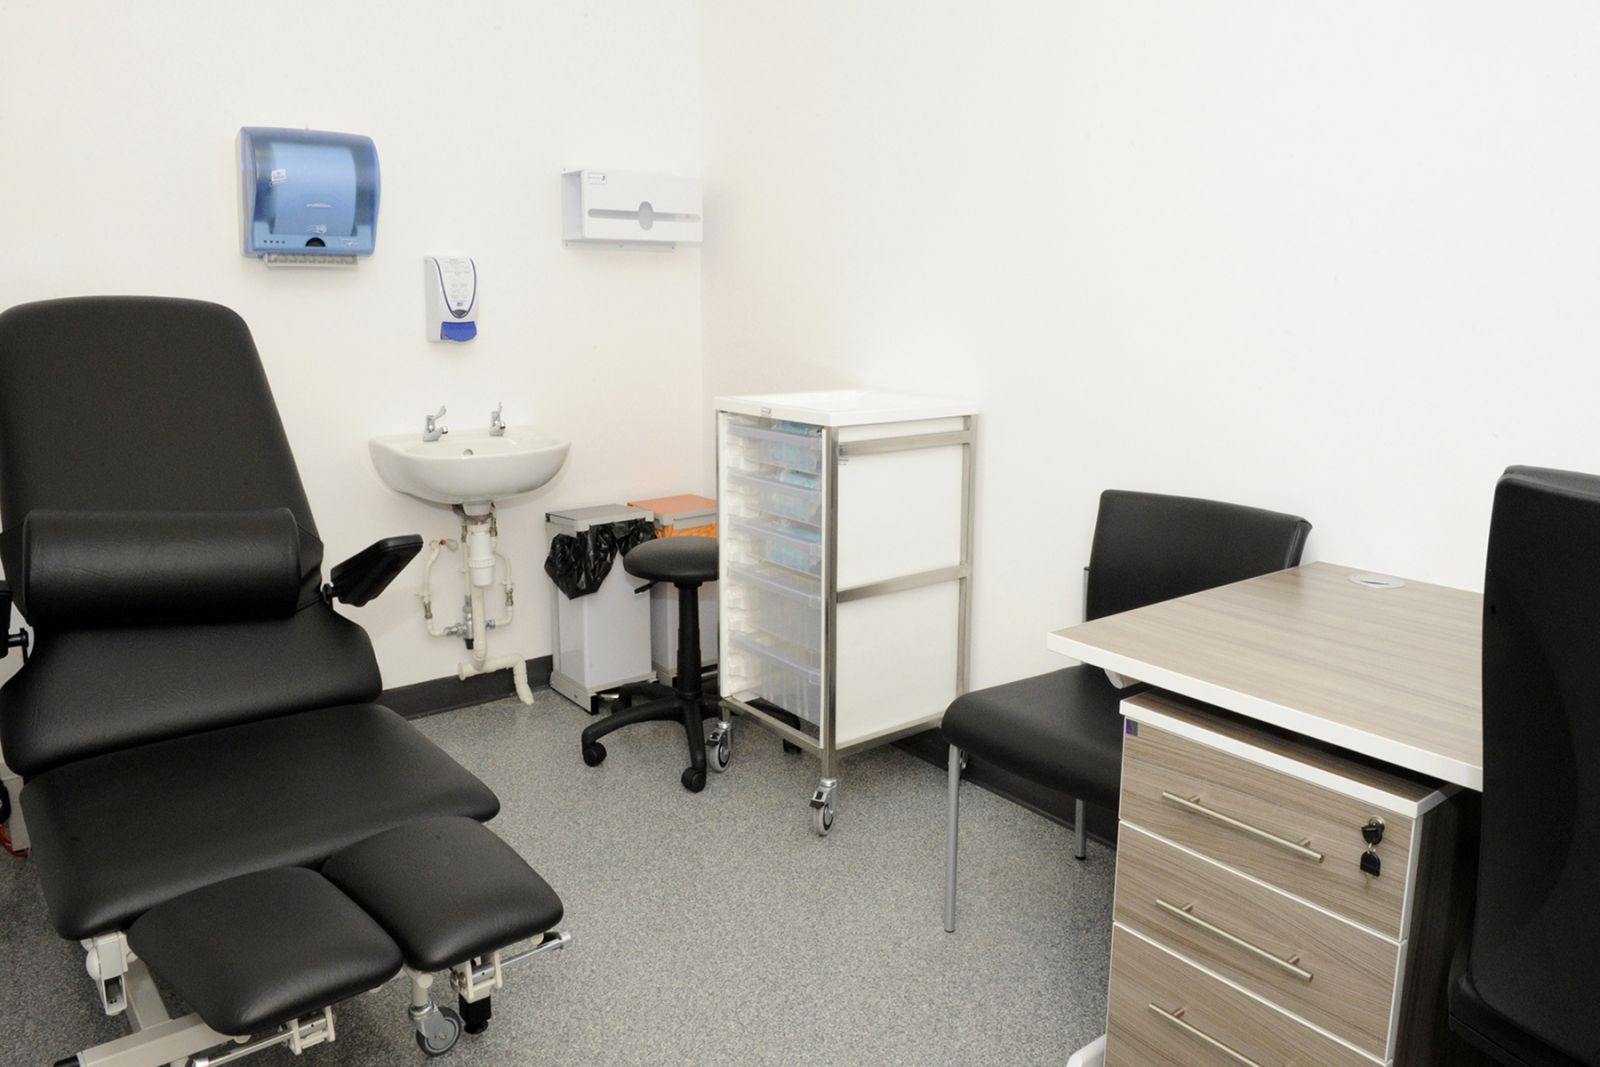 Clinical consulting rooms